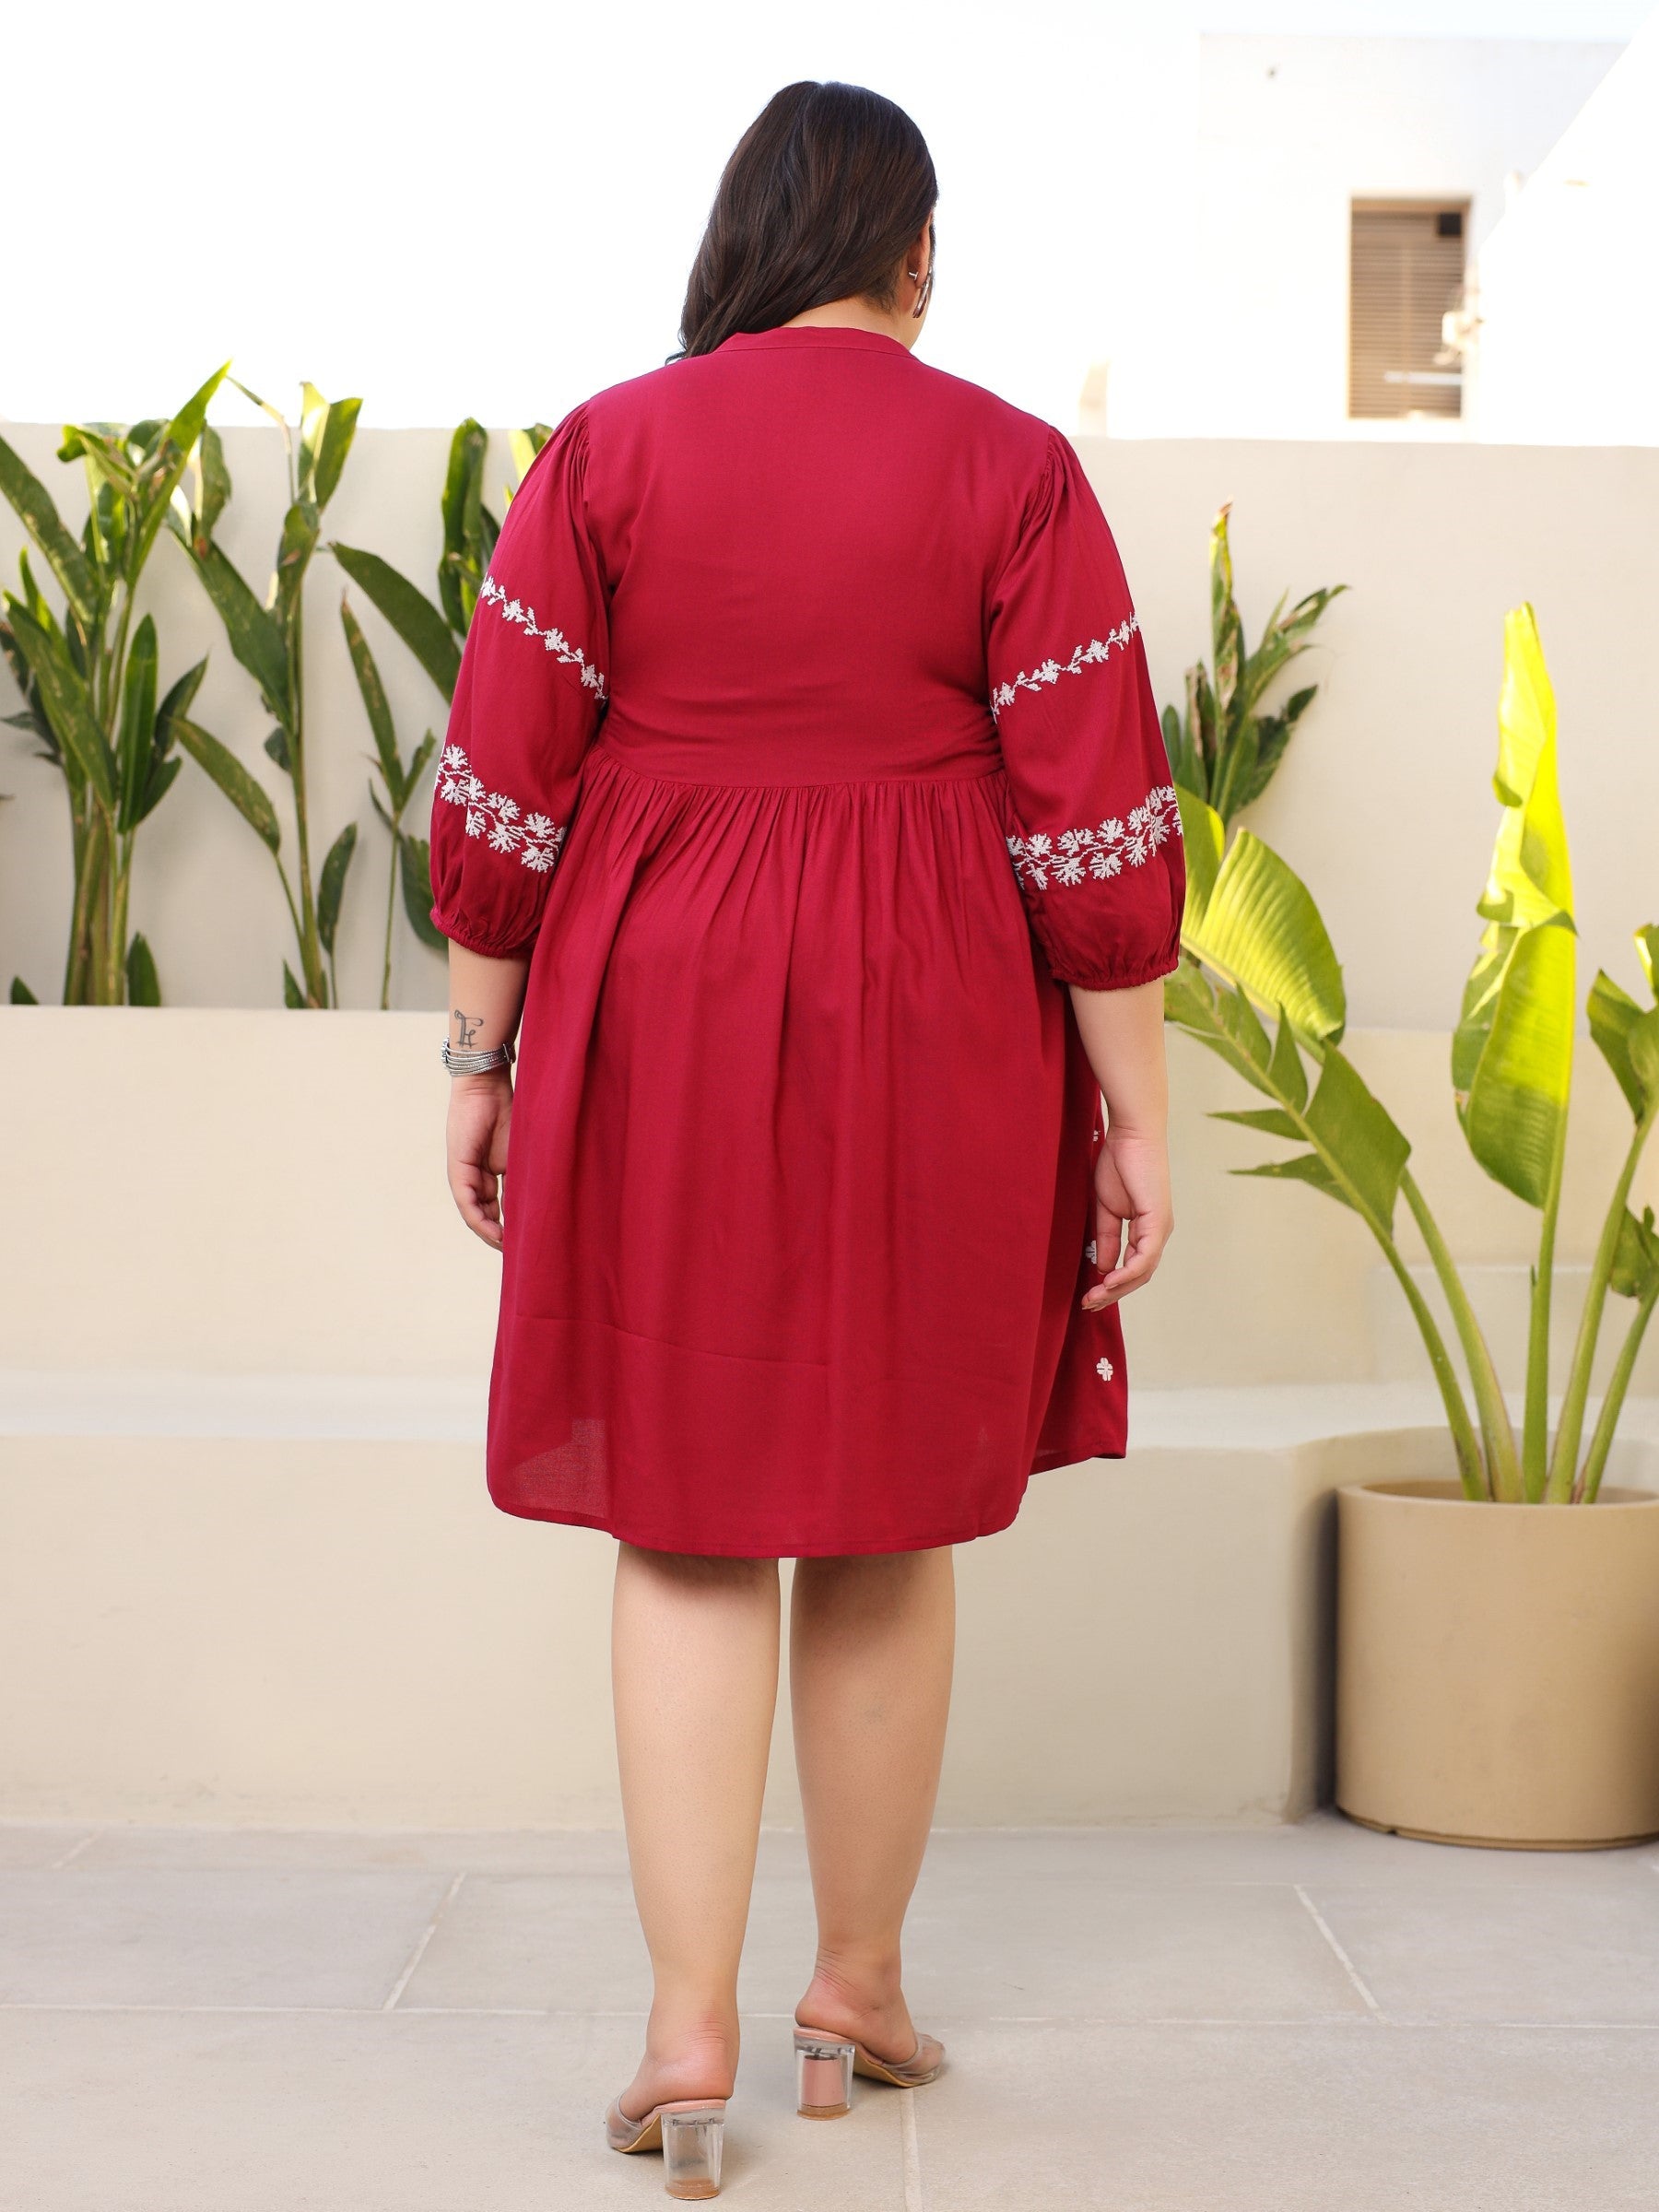 Rayon Wine Cross Stitched Embroidered Plus Size Short Dress With Dori Tie Ups & Tassels